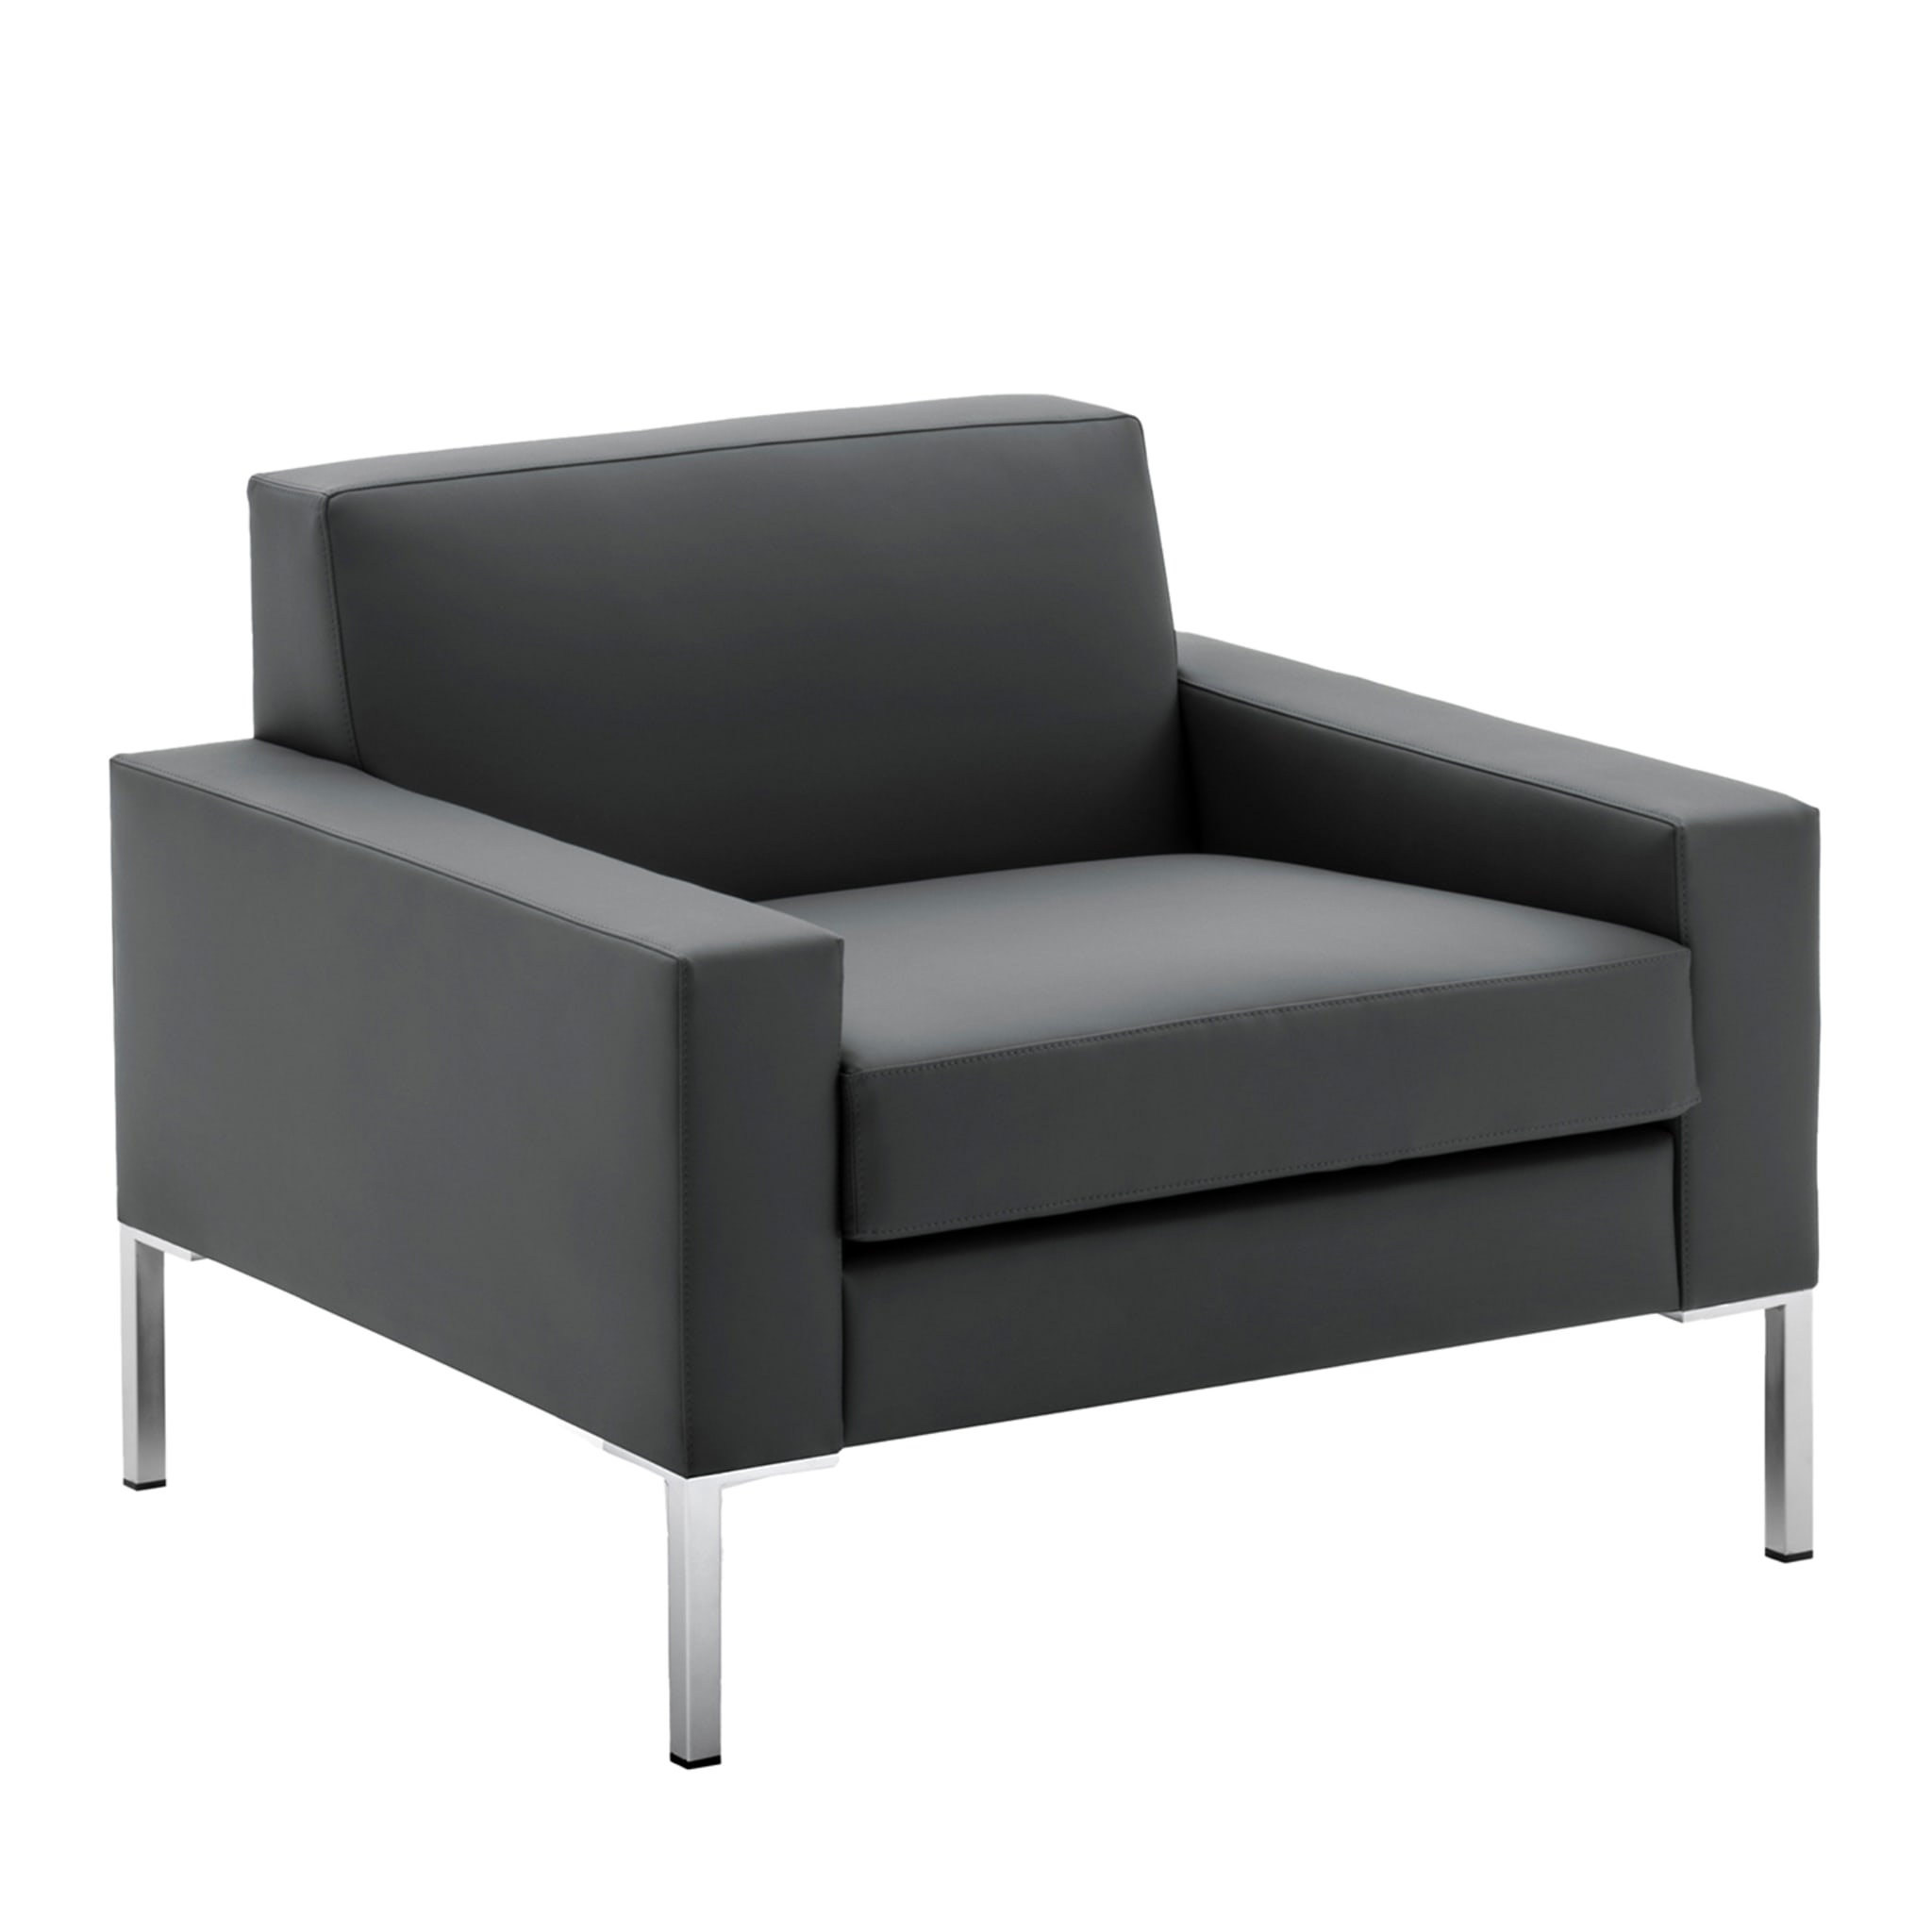 CUBIKO anthracite armchair #2 - Main view